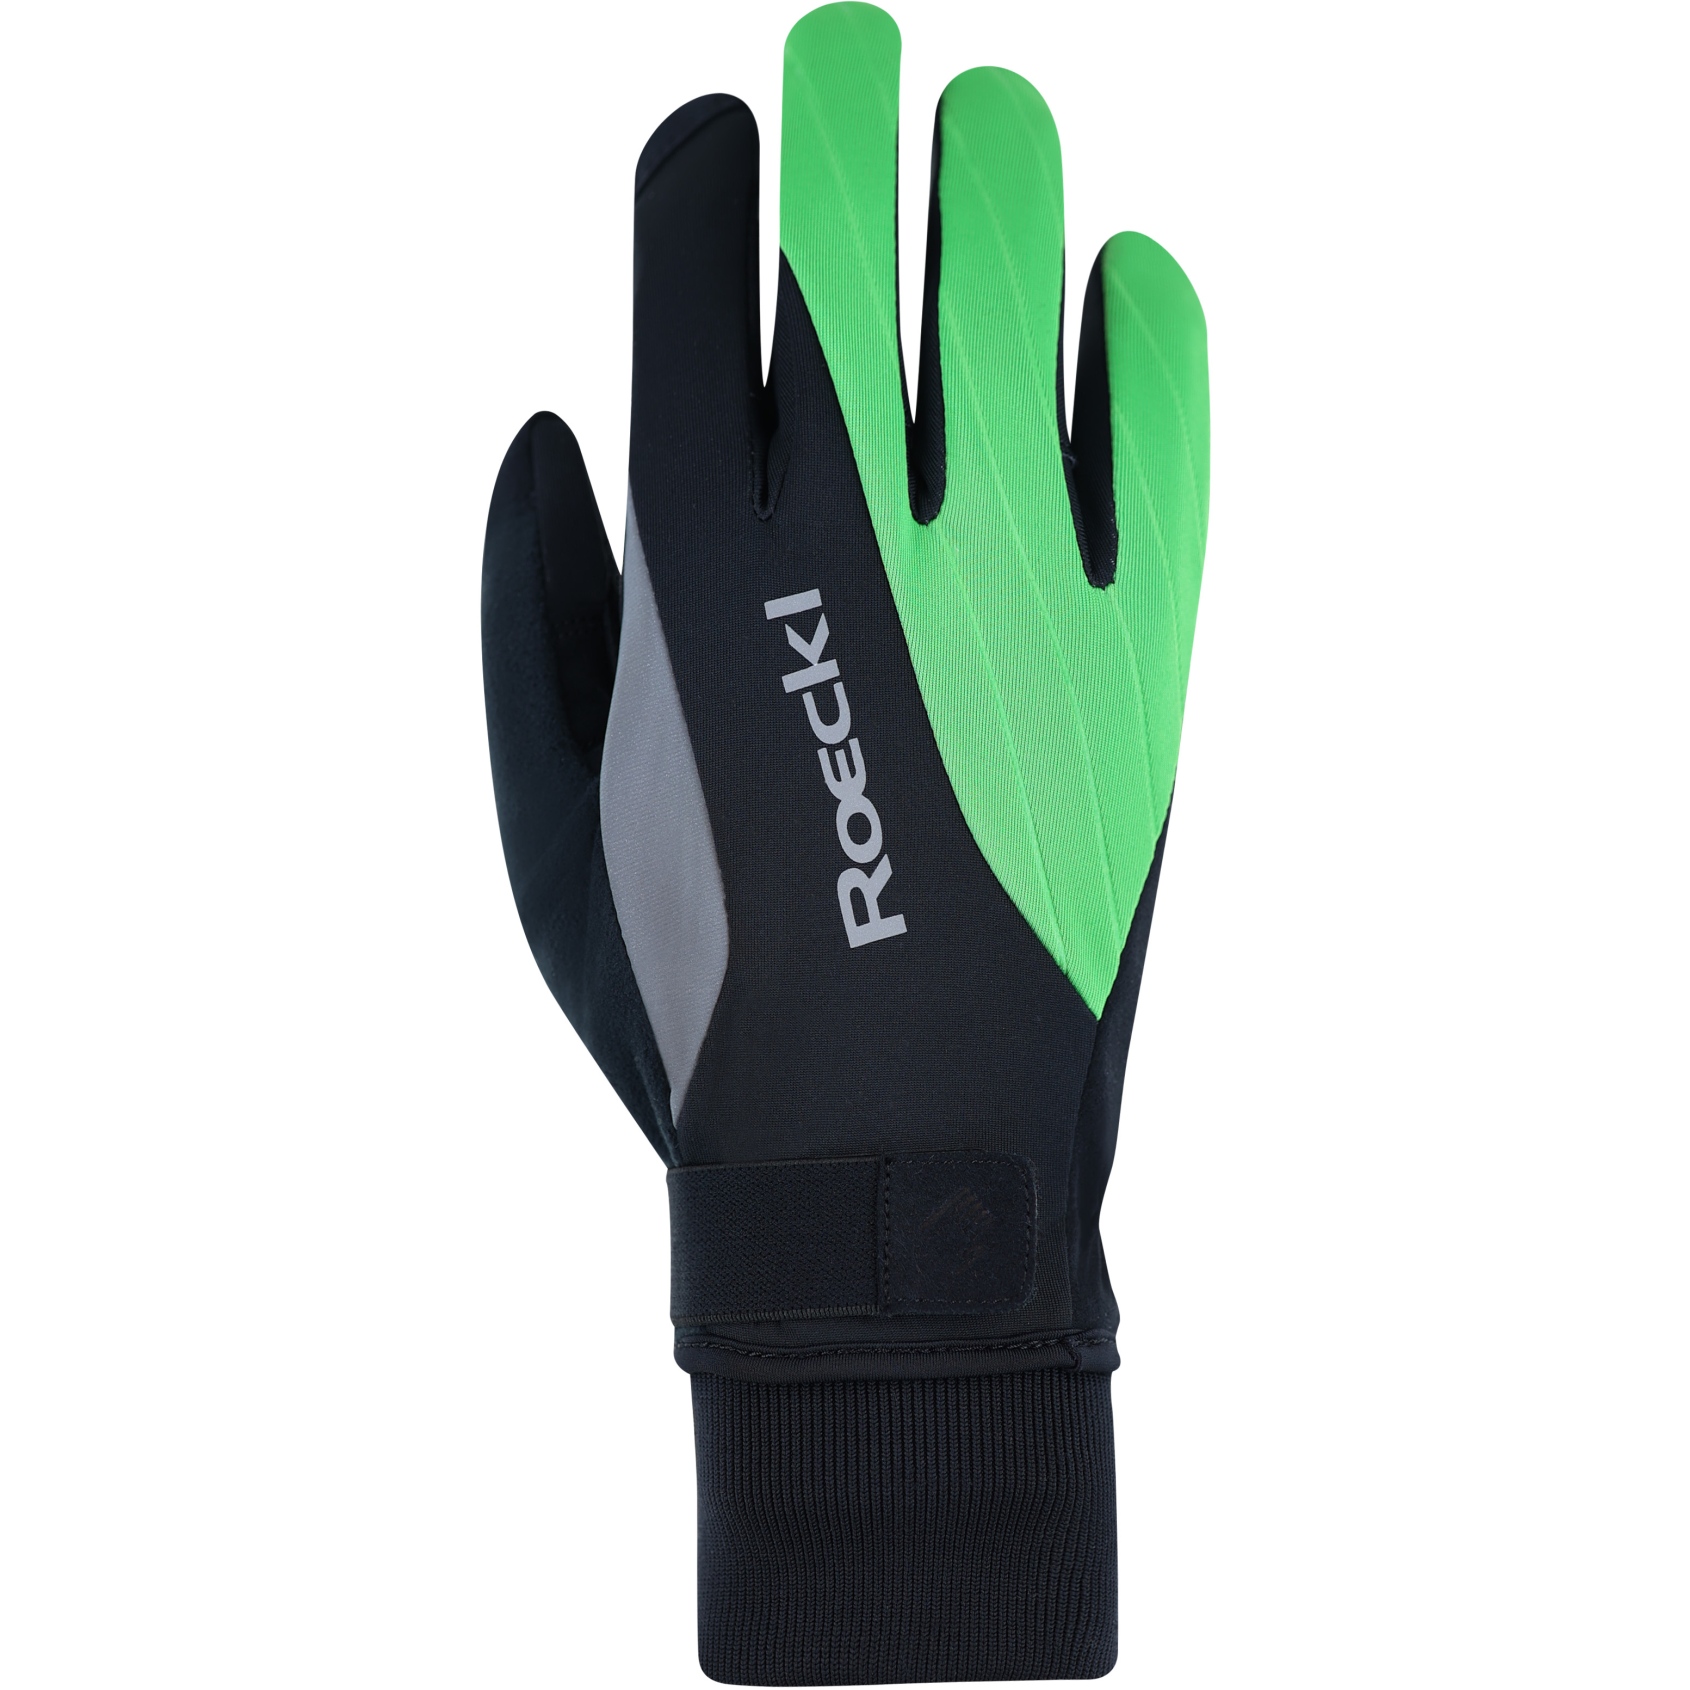 Picture of Roeckl Sports Ravensburg 2 Cycling Gloves - black/classic green 9020